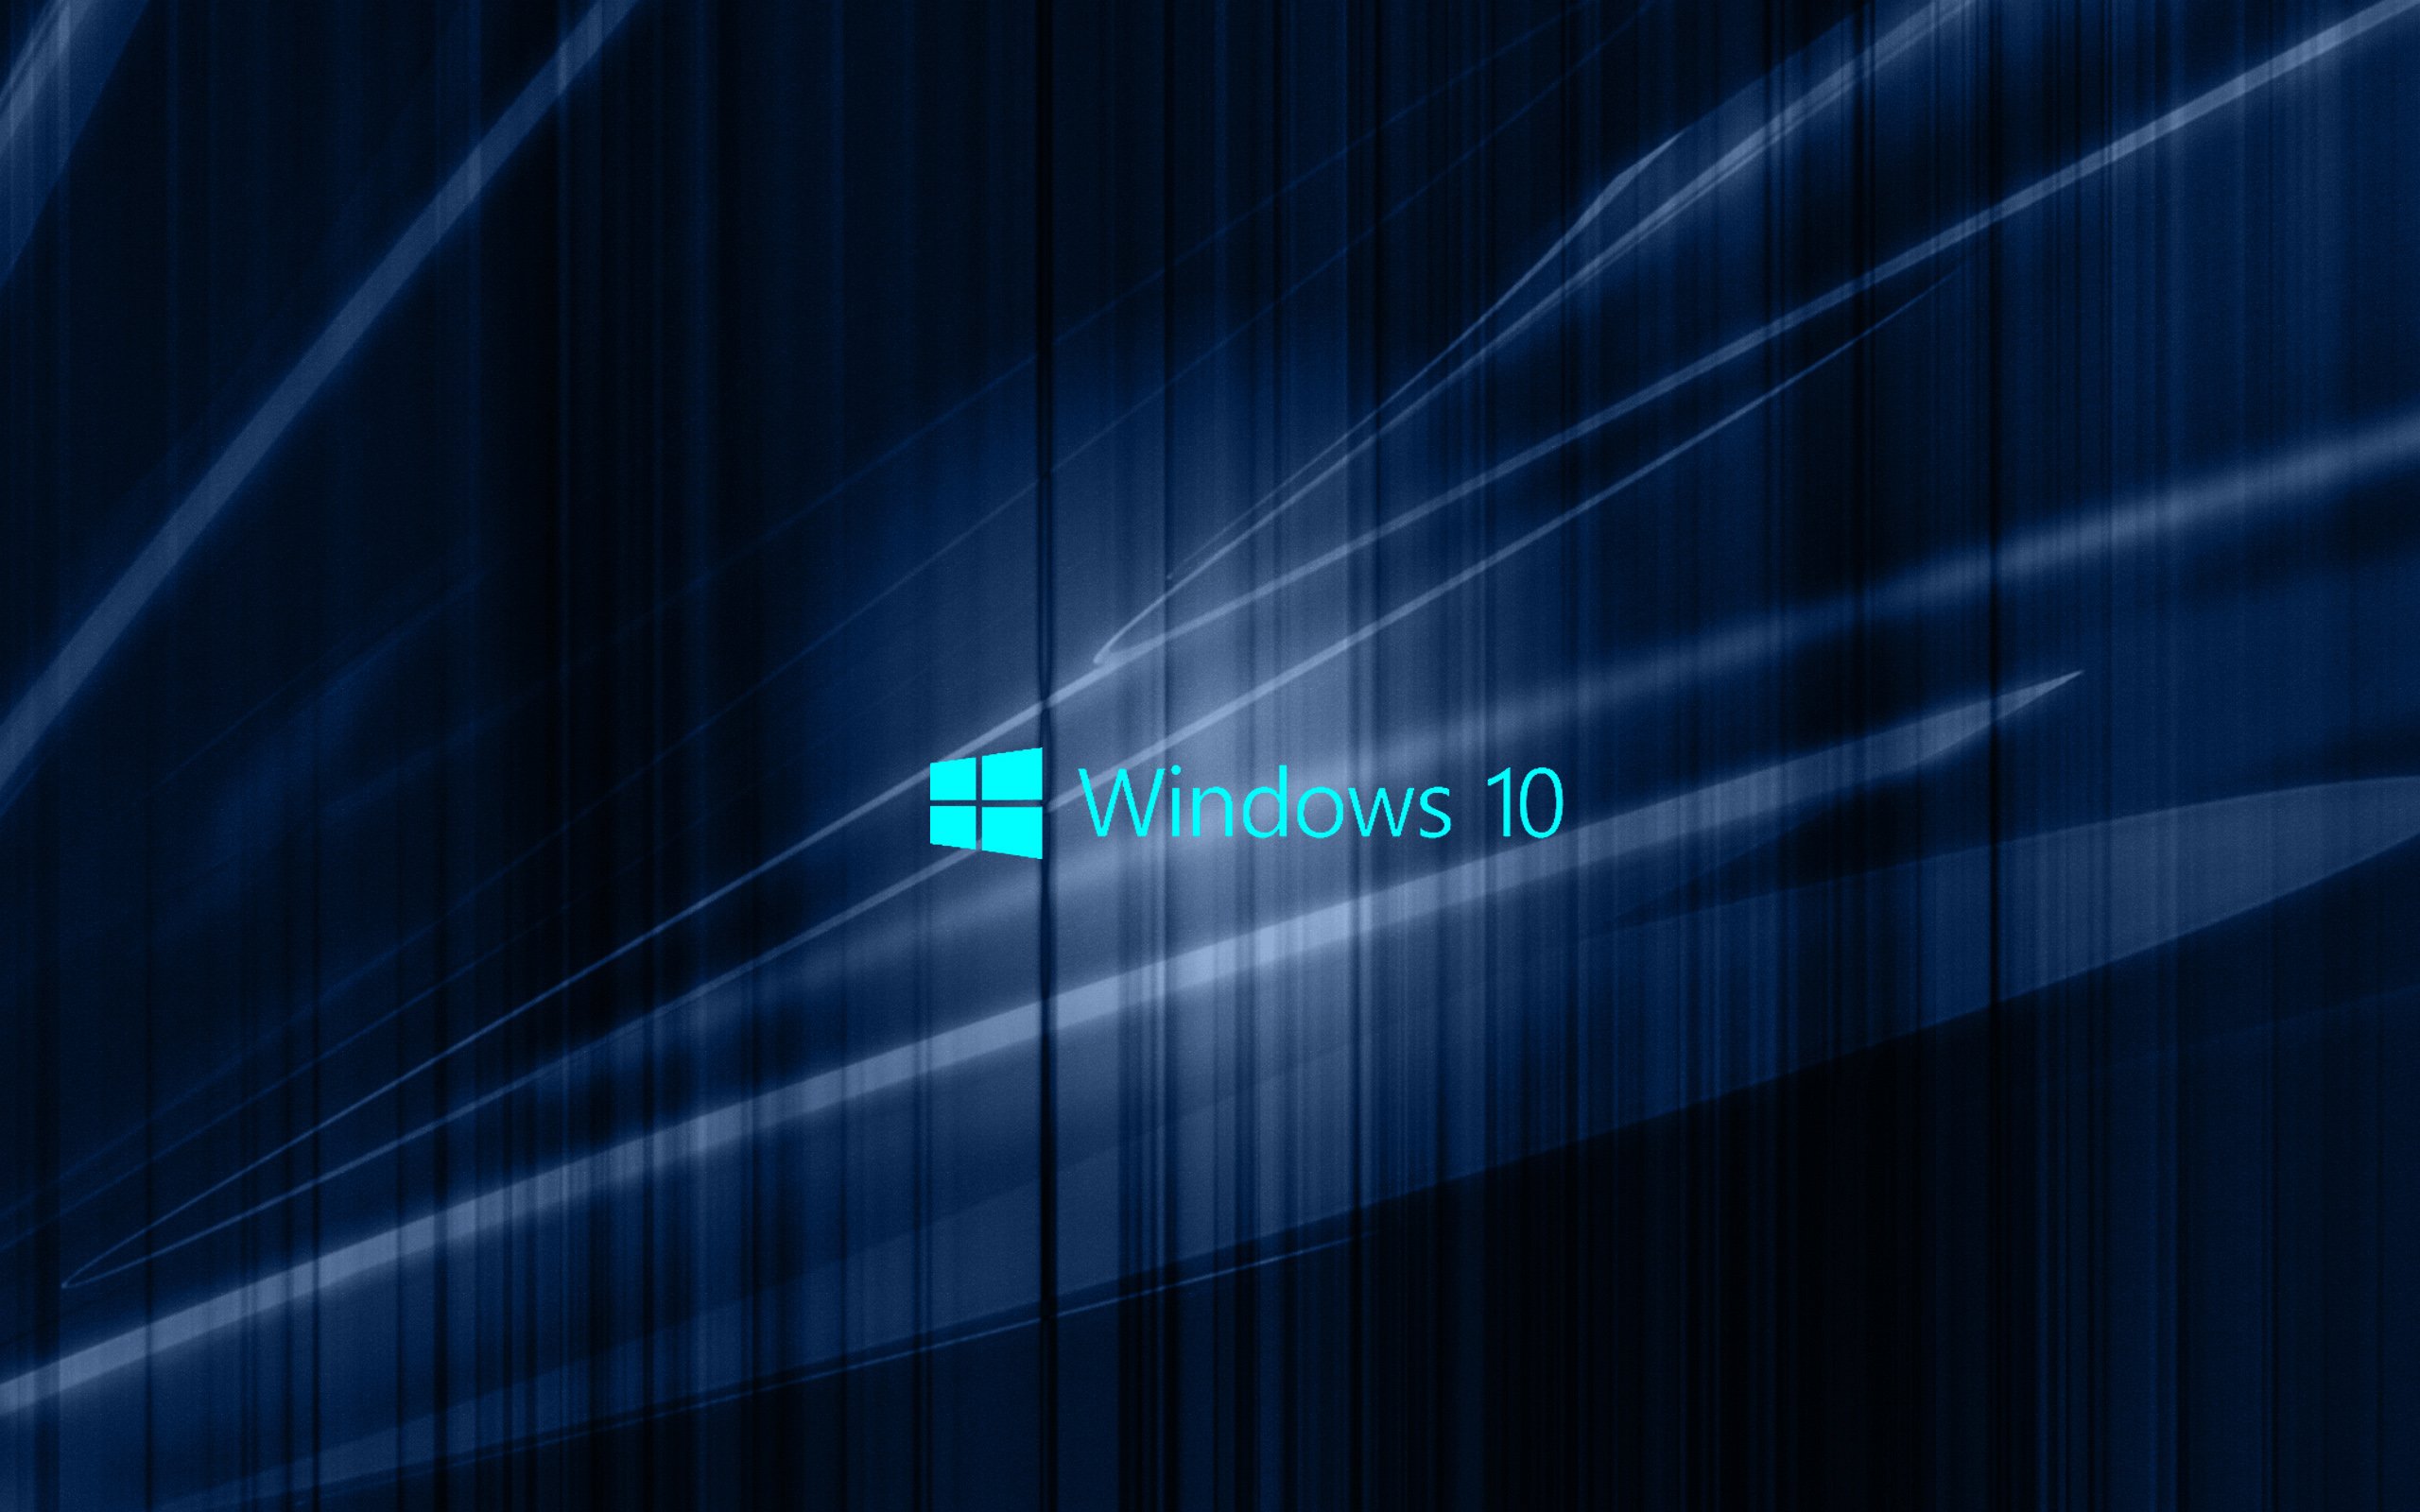 Download wallpaper Windows dark blue abstraction, emblem, win Windows for desktop with resolution 2560x1600. High Quality HD picture wallpaper